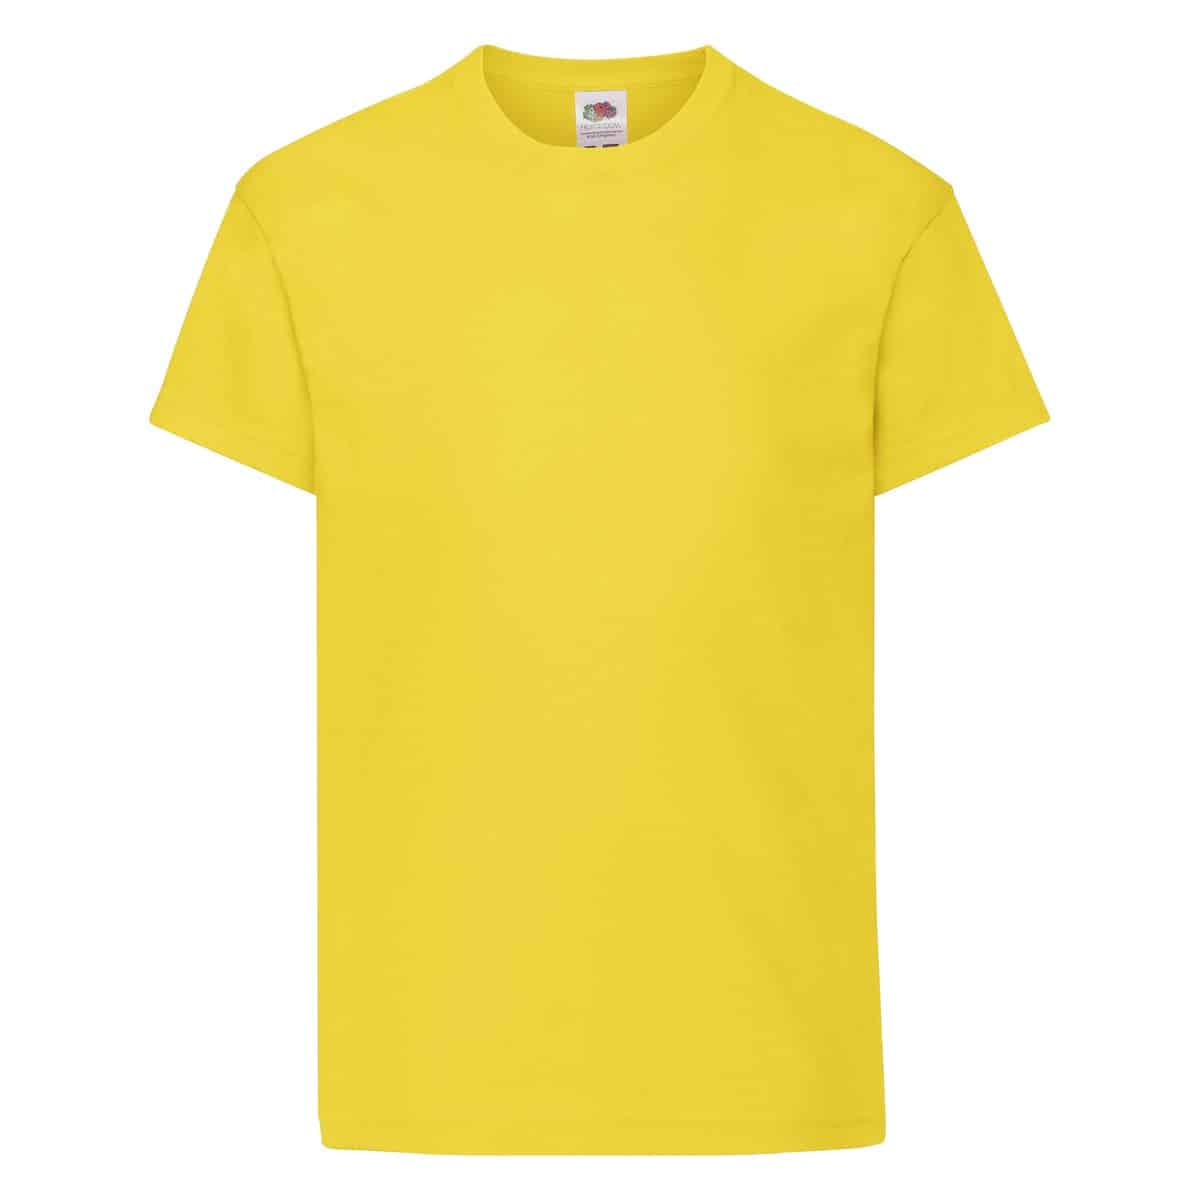 Giallo Manufacturer Size:34 Sunflower Fruit of the Loom T-Shirt Bambino 12-13 Anni